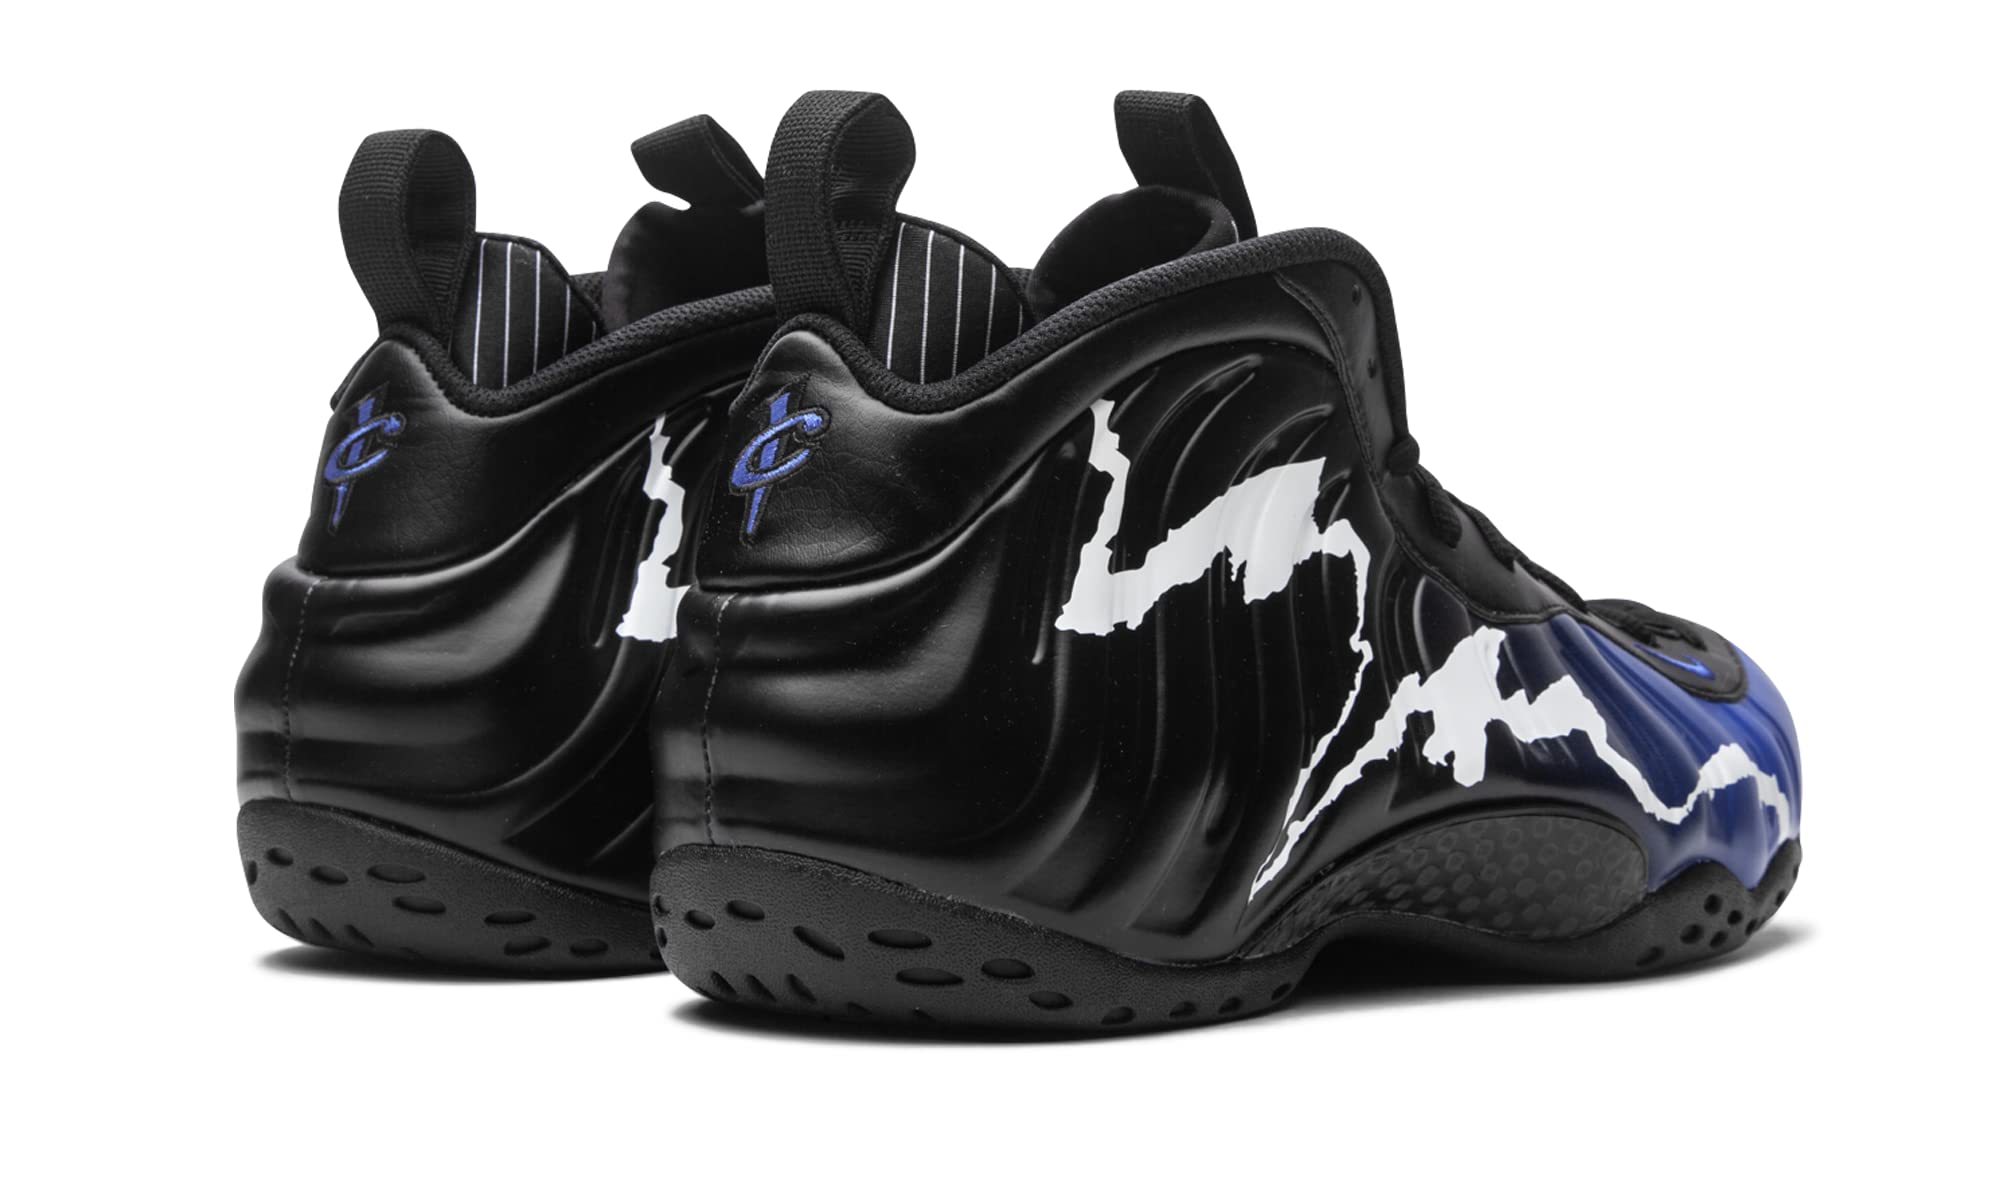 Nike Mens Air Foamposite One CN0055 001 96 All Star - Size 6 Black/Game Royal-White